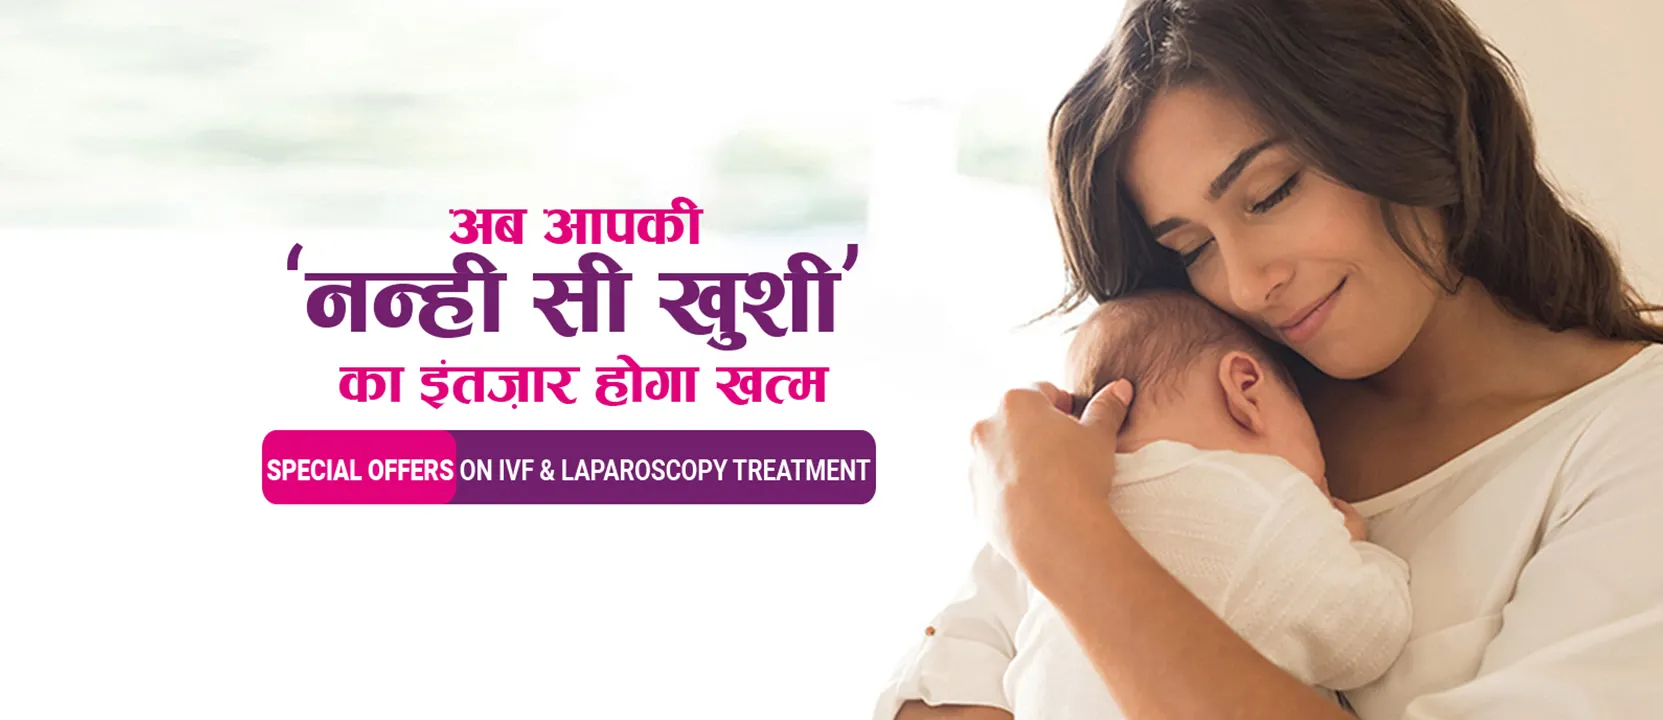 ivf cost in Udaipur | ivf treatment cost in Udaipur